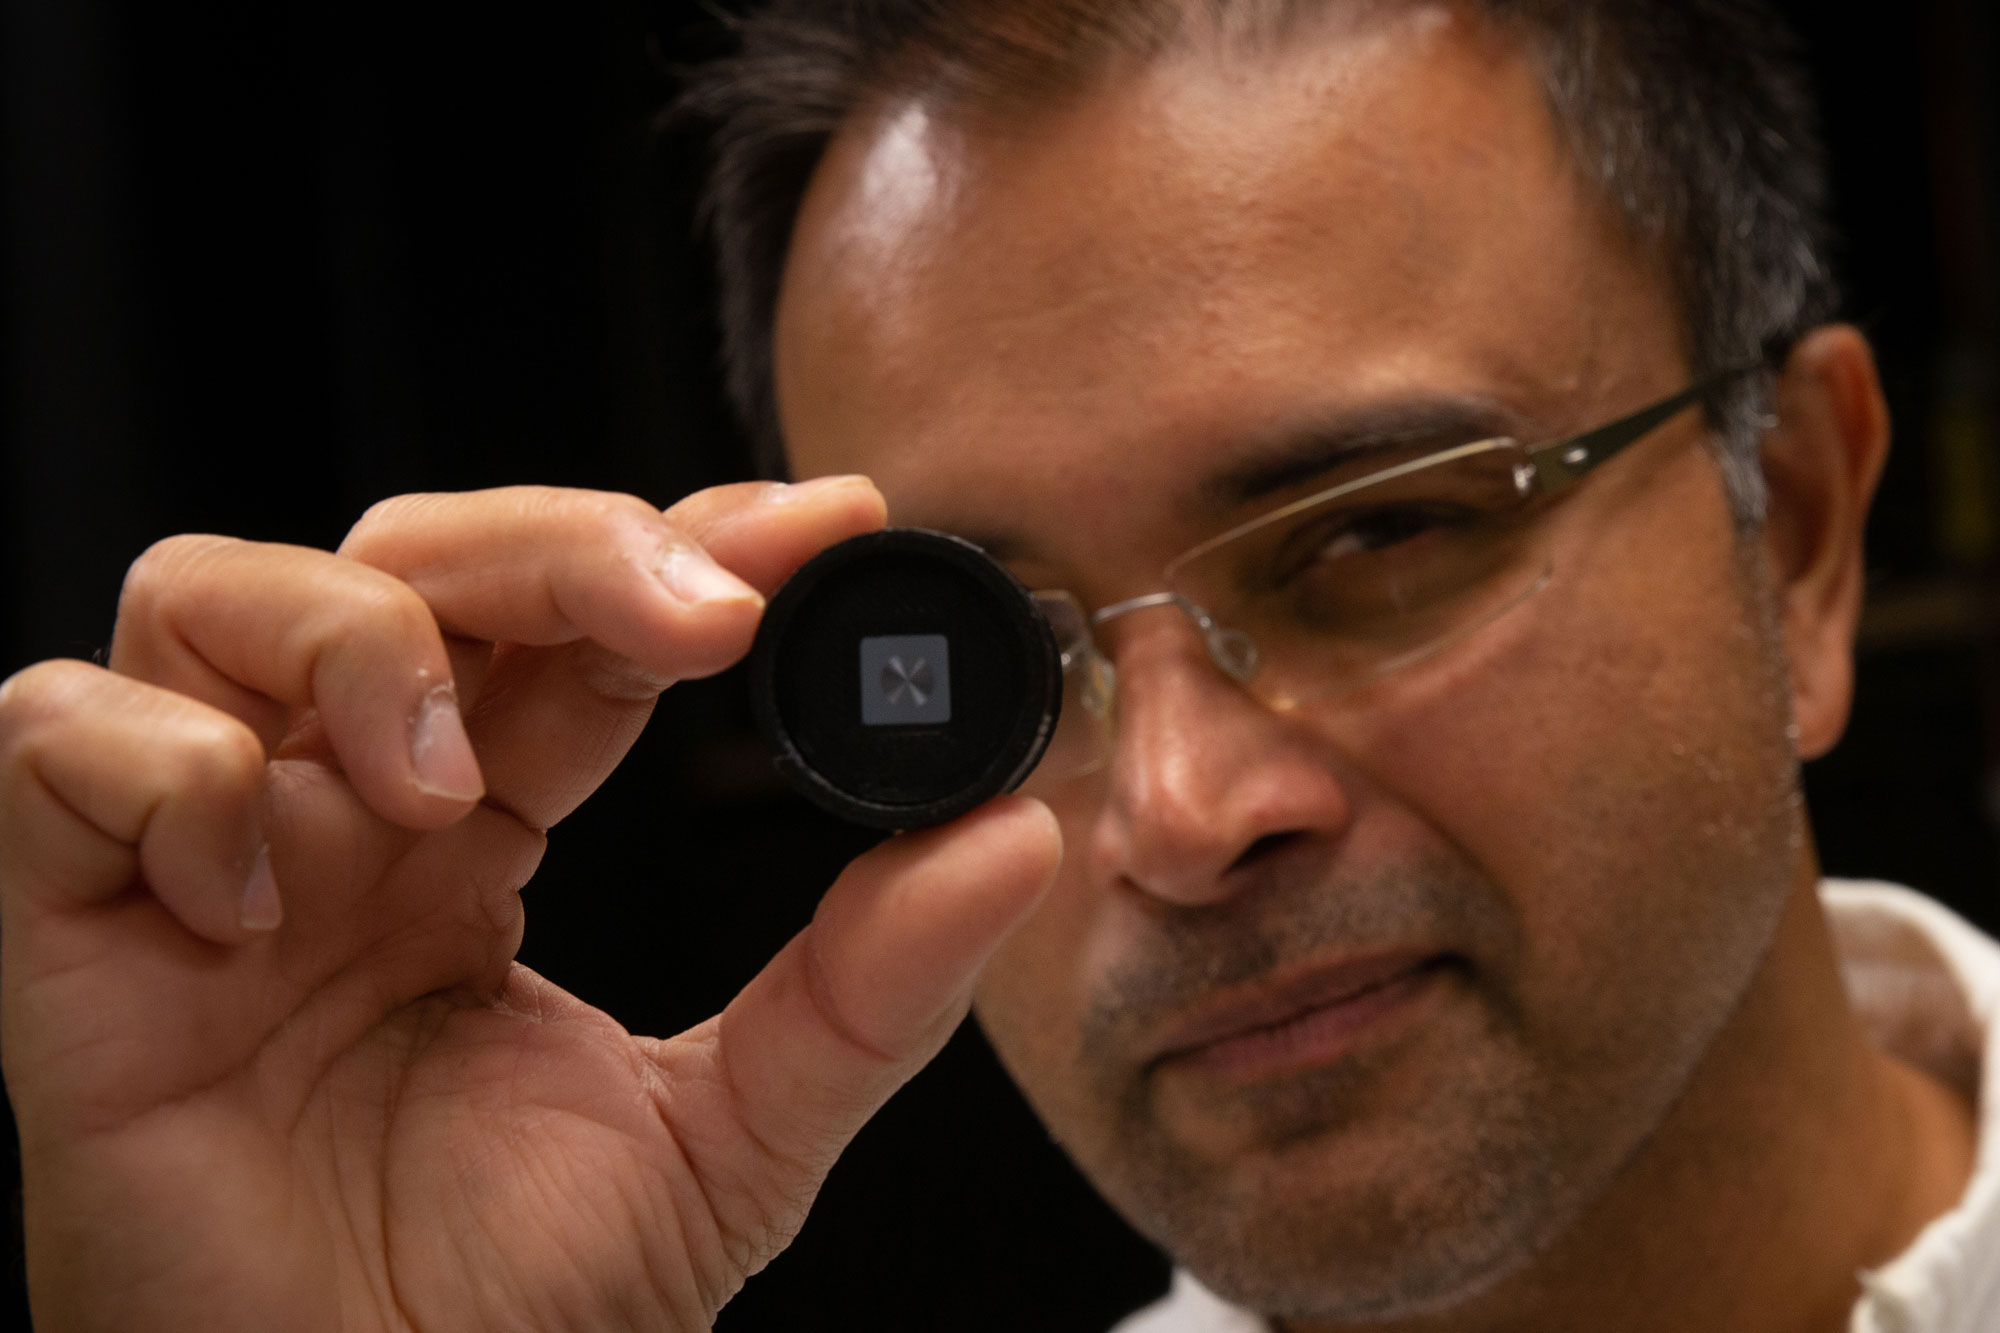 University of Utah electrical and computer engineering associate professor Rajesh Menon is part of a team that has developed a super thin, flat and lightweight optical lens capable of filming in the dark